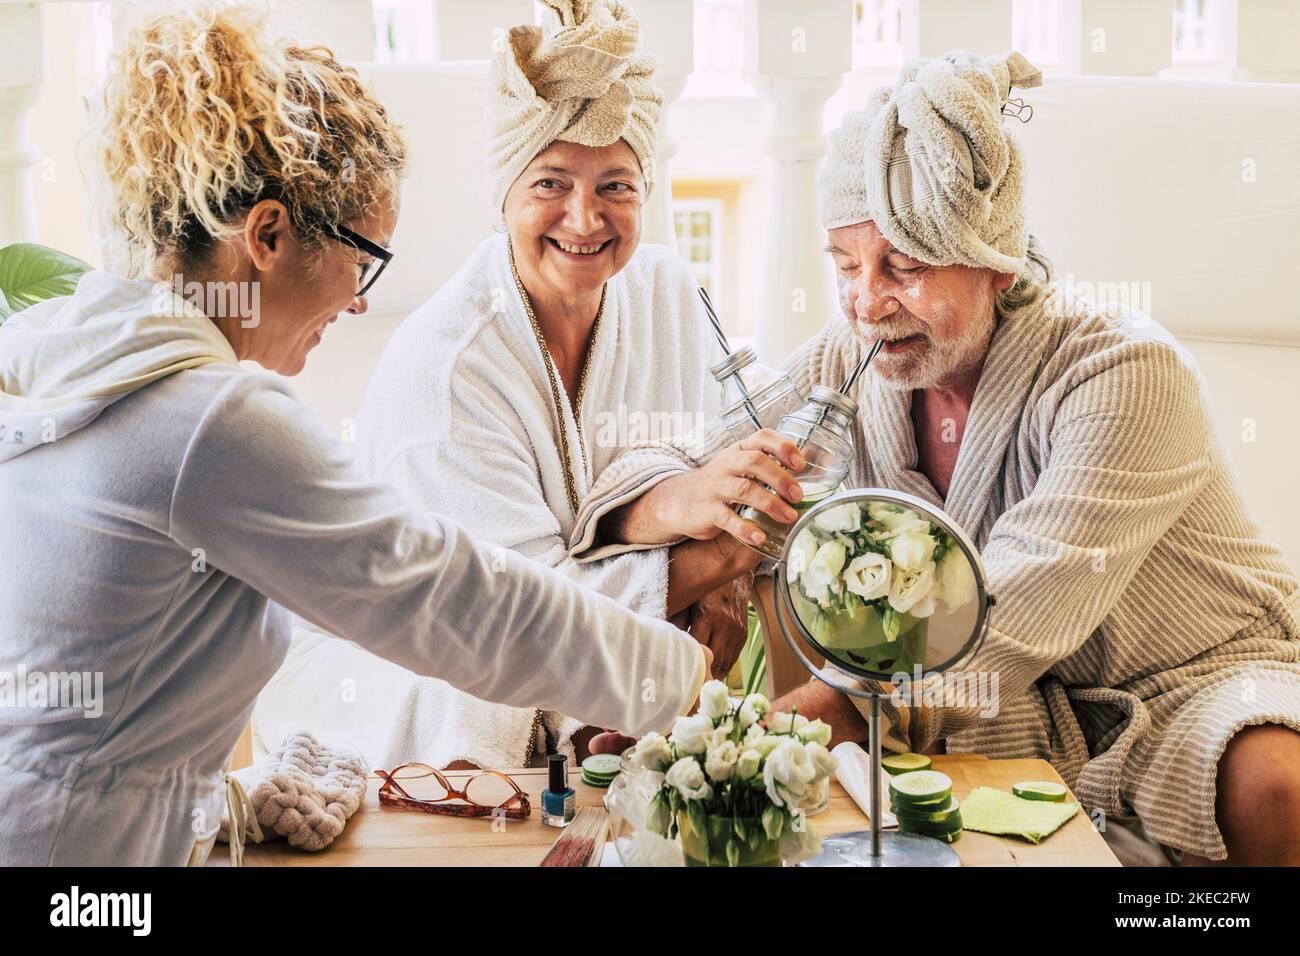 couple of two seniors enjoying a spa and massage traetment together with an assistance helping them - drinking cocktails and having fun smiling Stock Photo